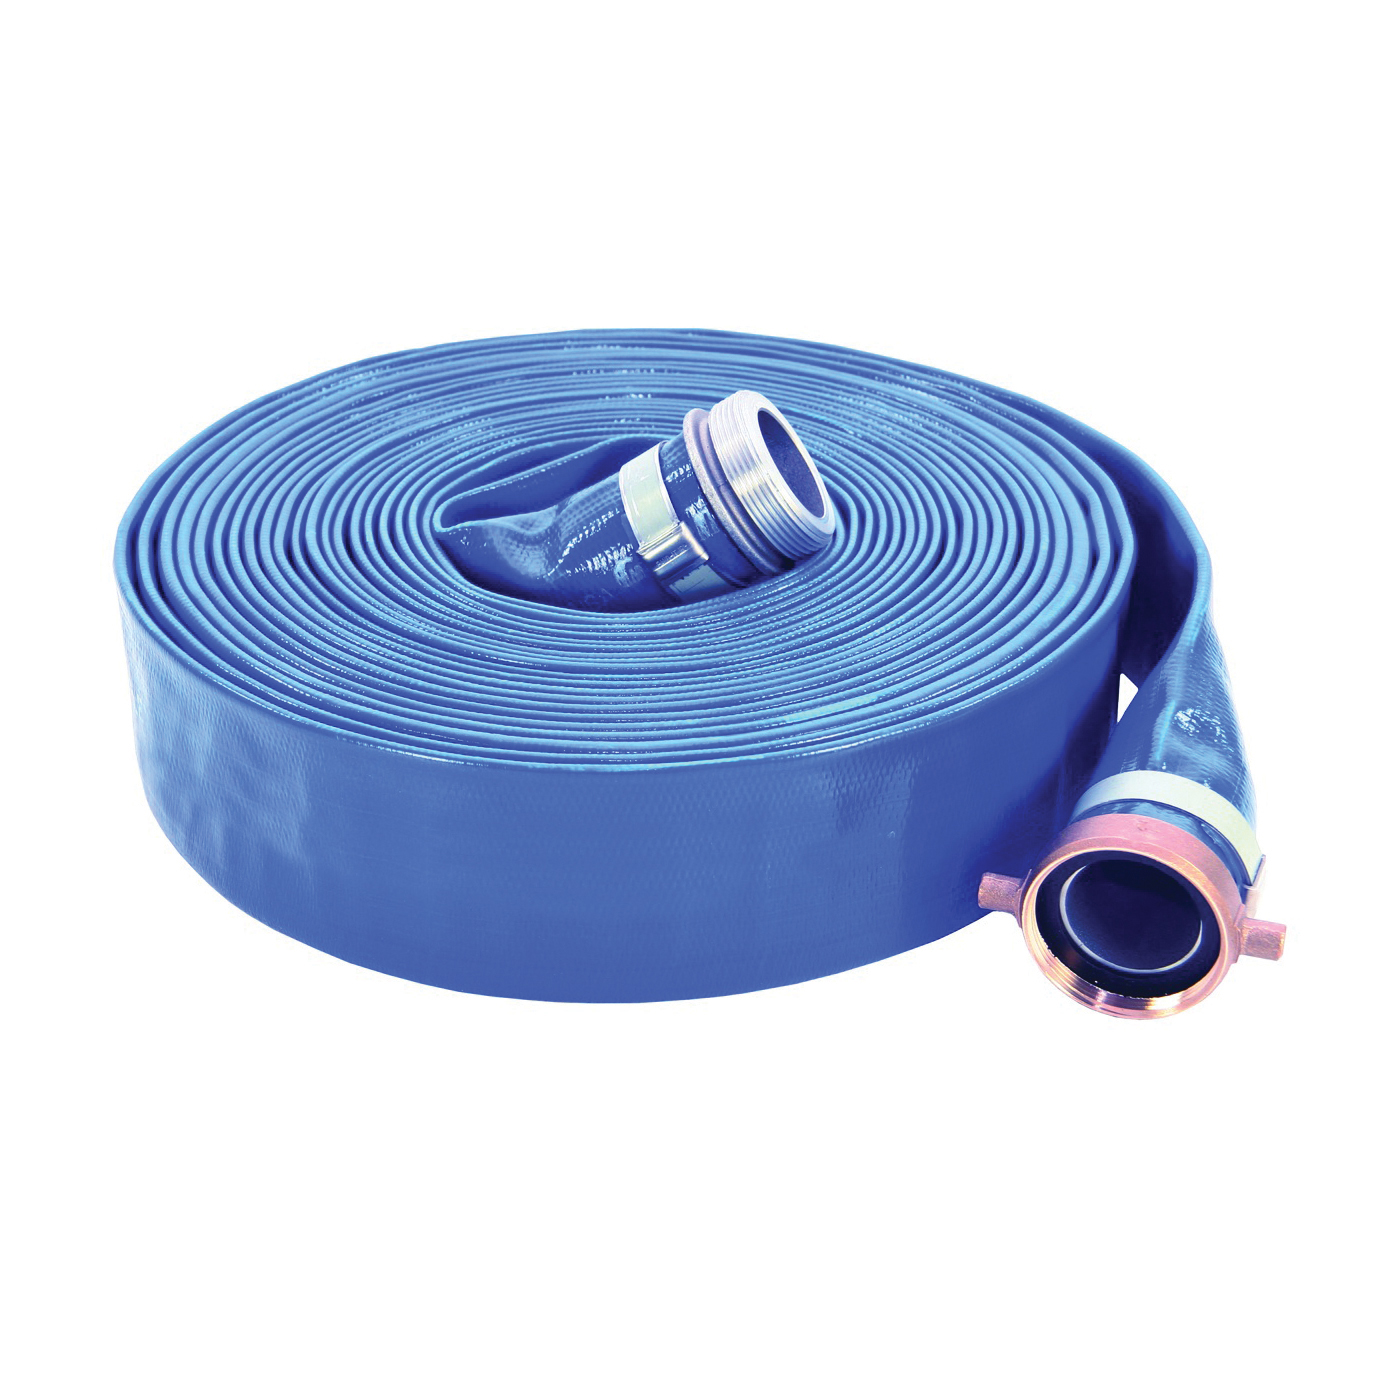 1148-4000-50-CE Water Discharge Hose, 50 ft L, Camlock Female x Male, PVC, Blue